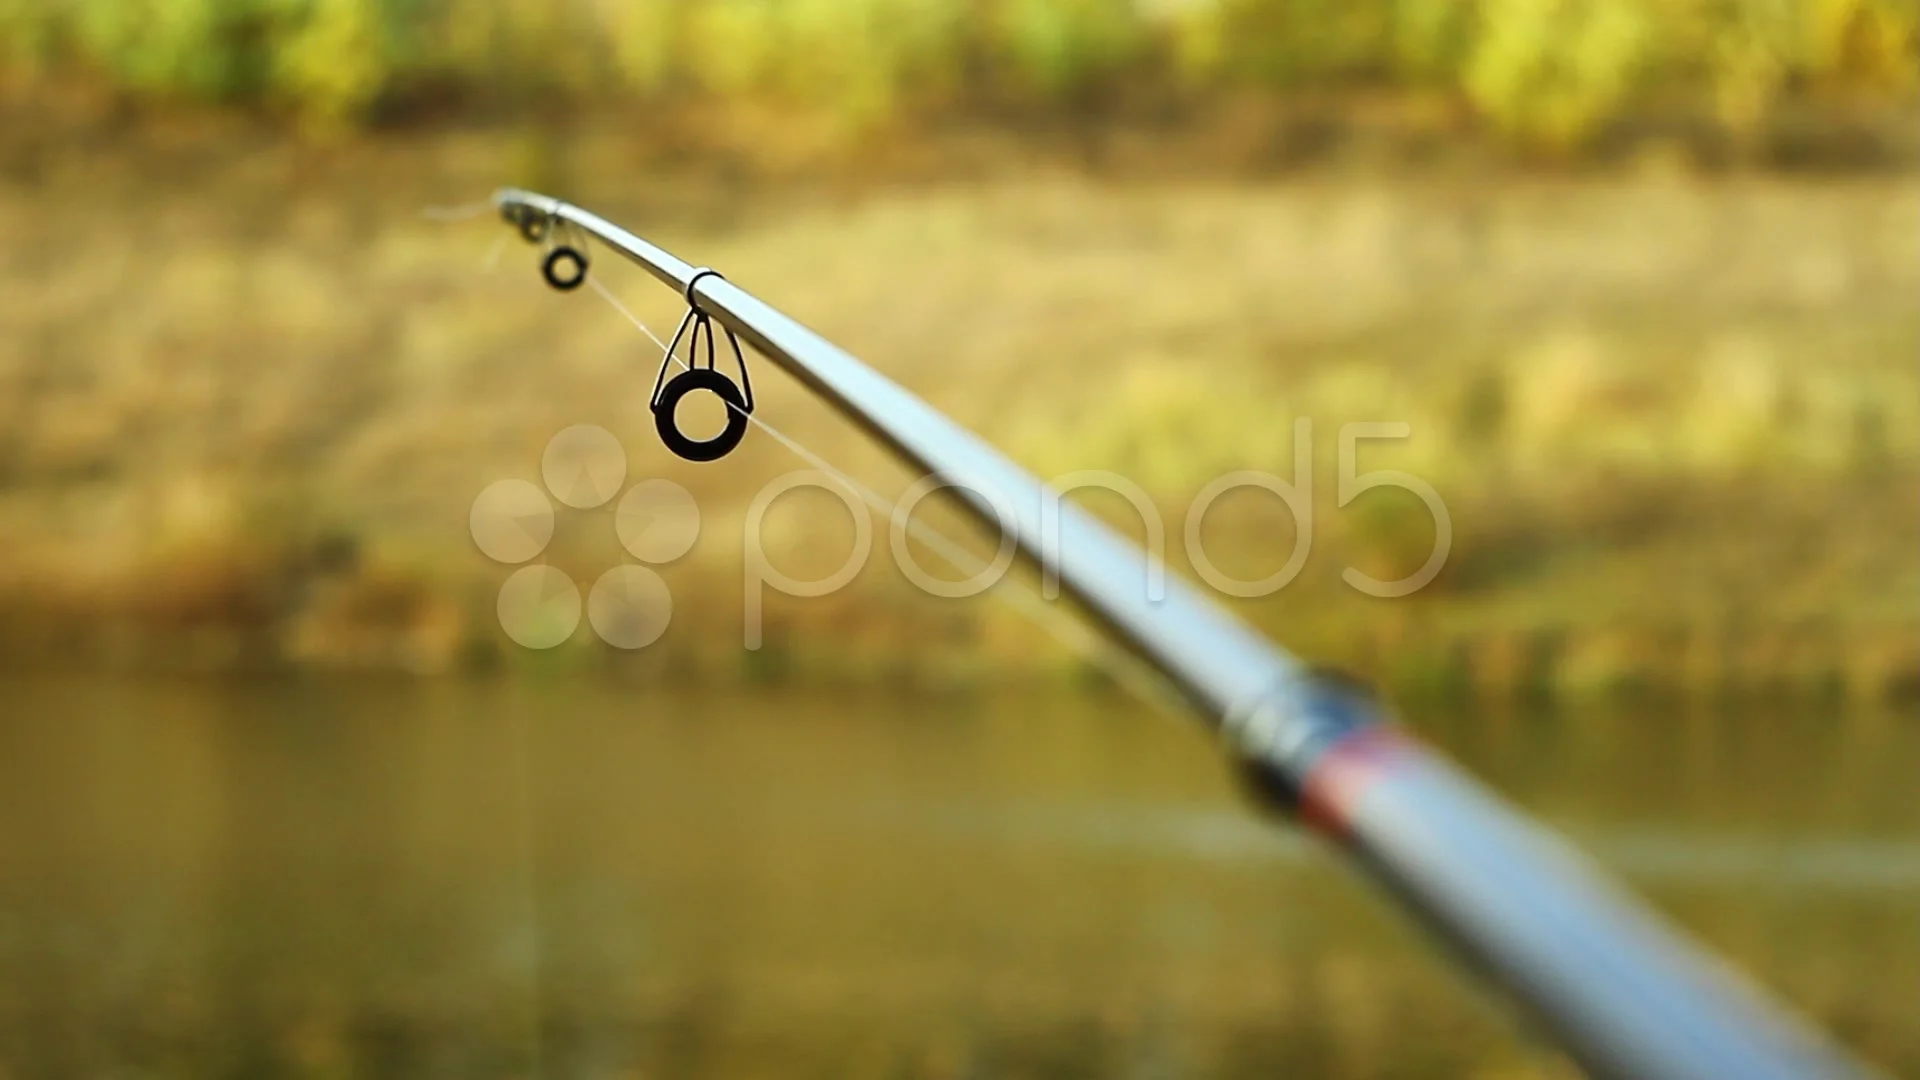 Man casting fly fishing pole at a river - Stock Image - F033/4200